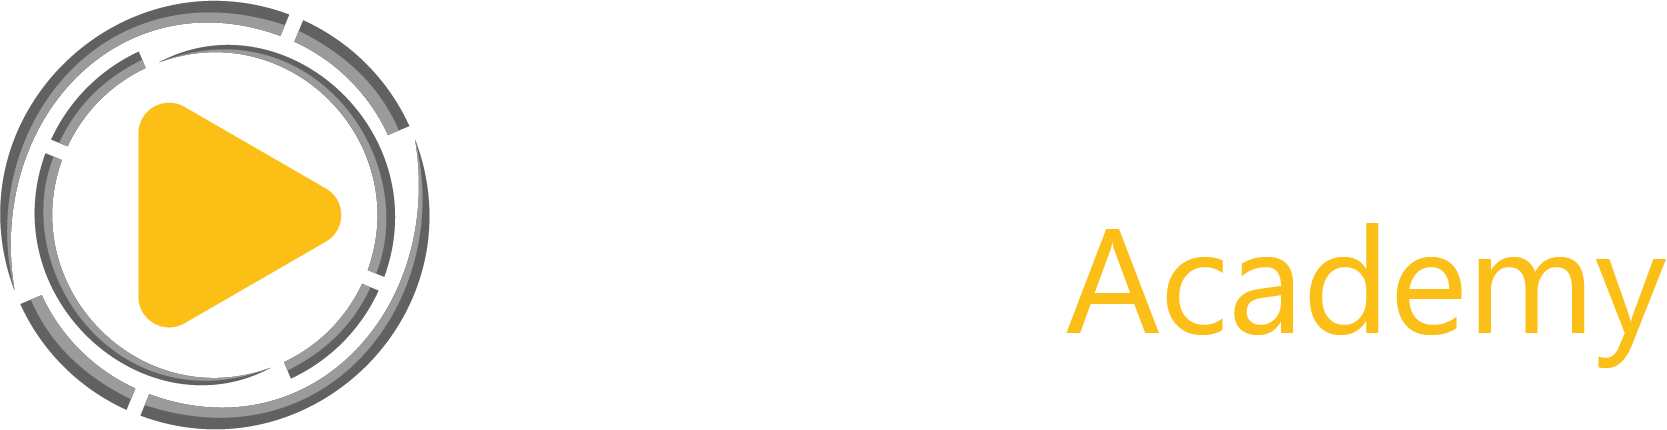 Corrections Learning Academy